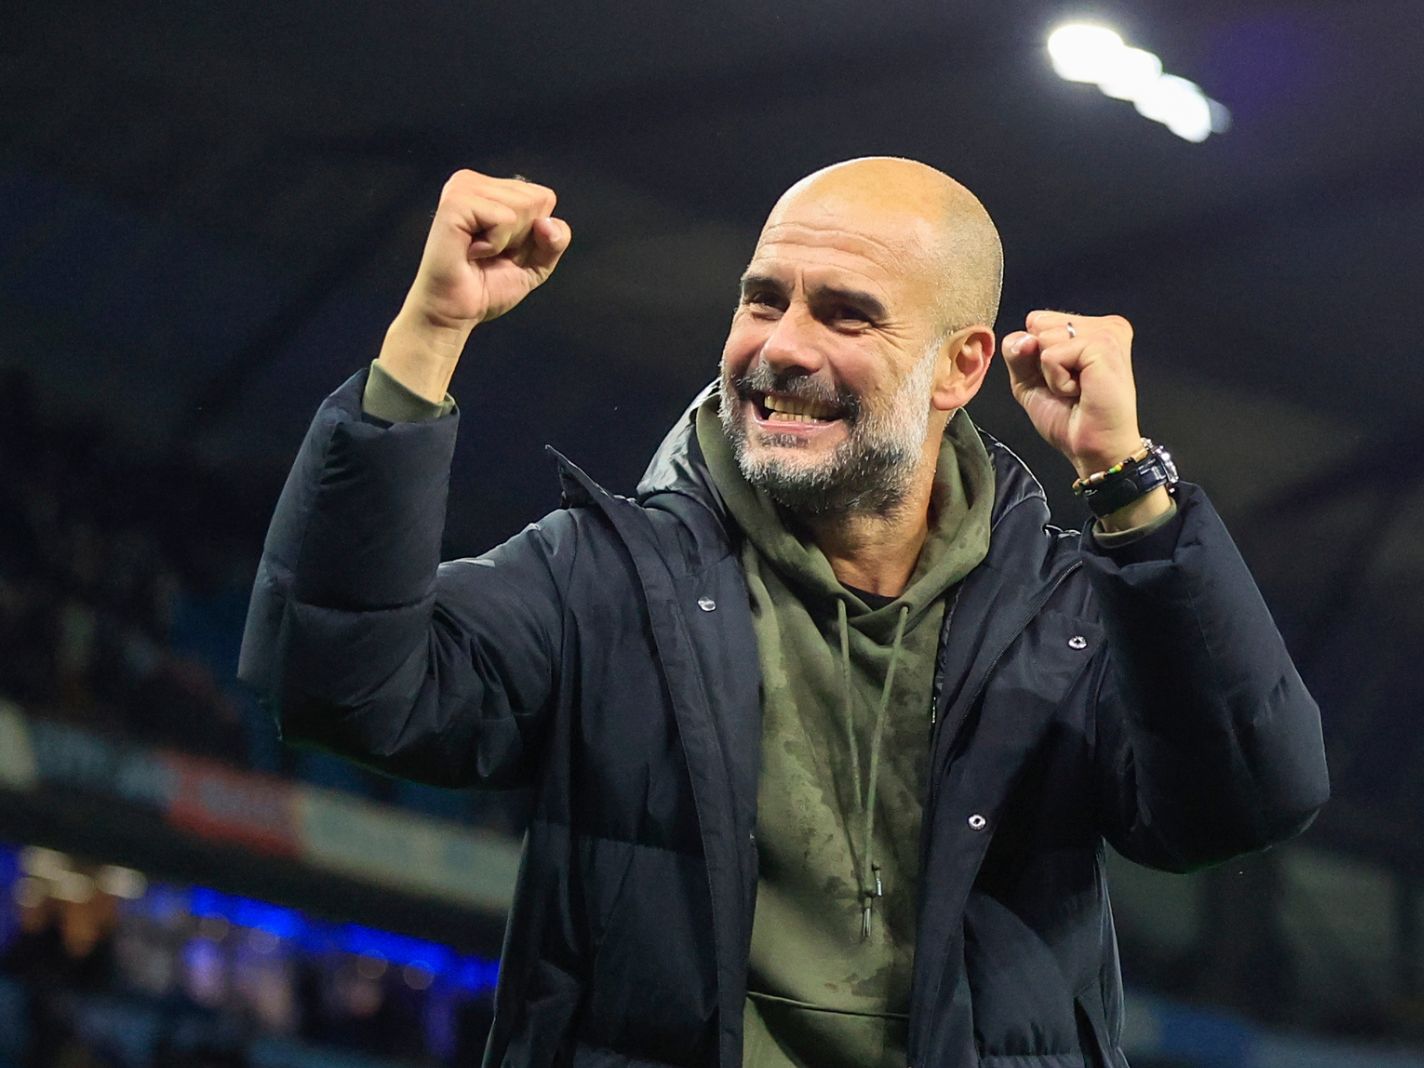 Now We’ve Got Pep Guardiola – New Man City Chant Sung to Stone Roses Track Catches Flak